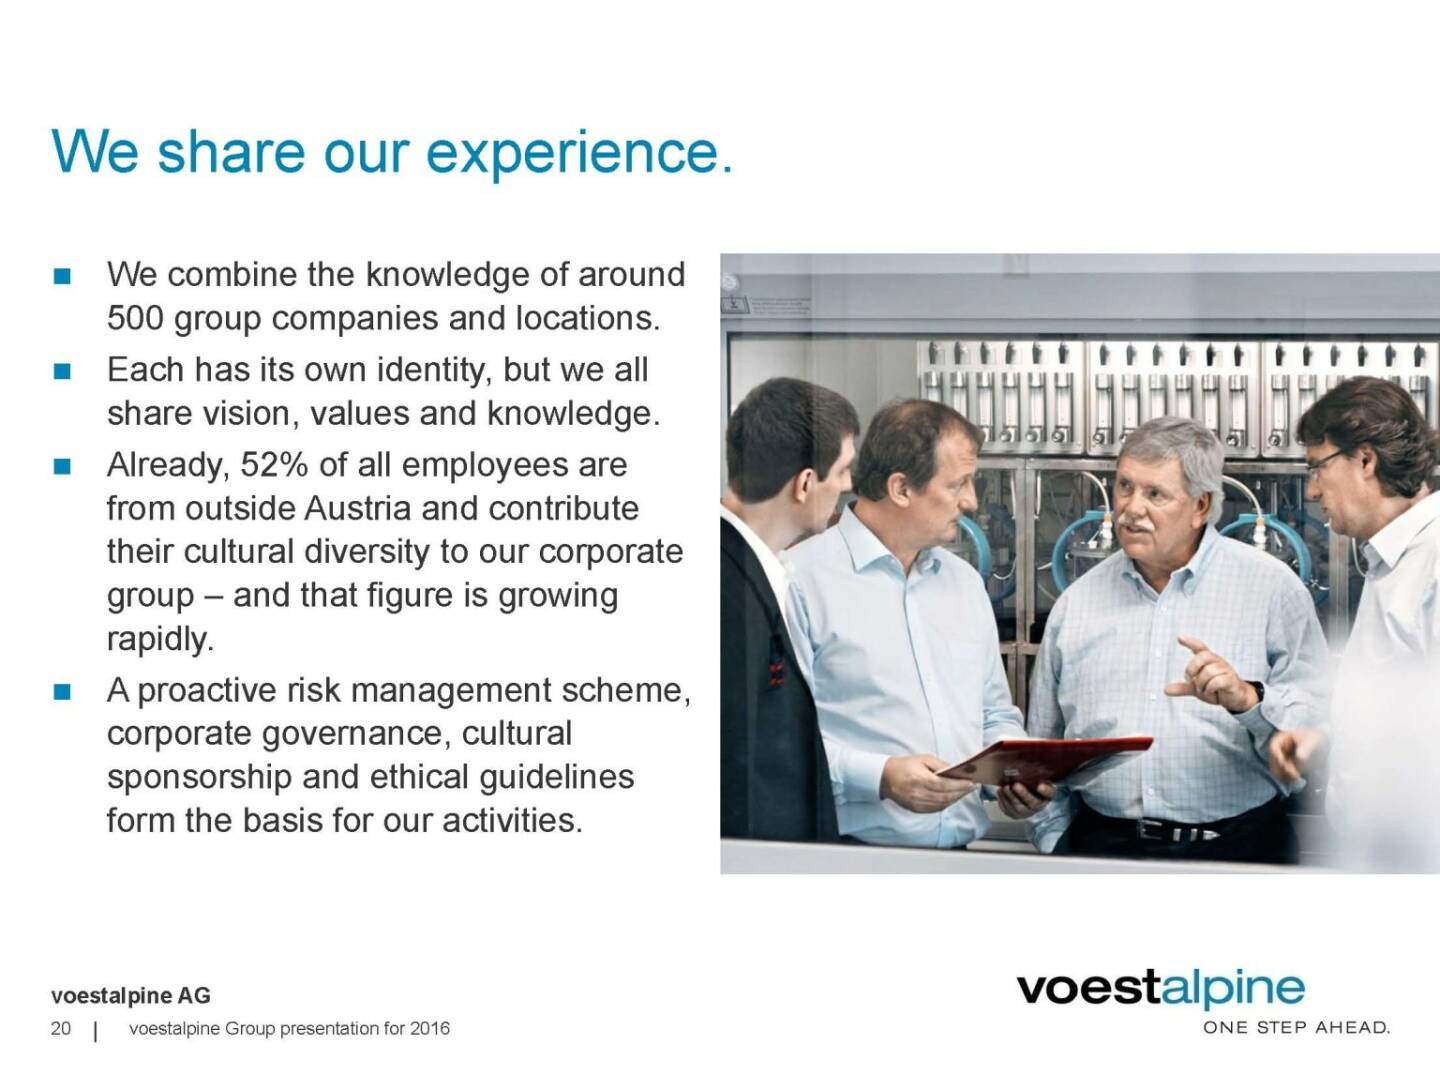 voestalpine - We share our experience